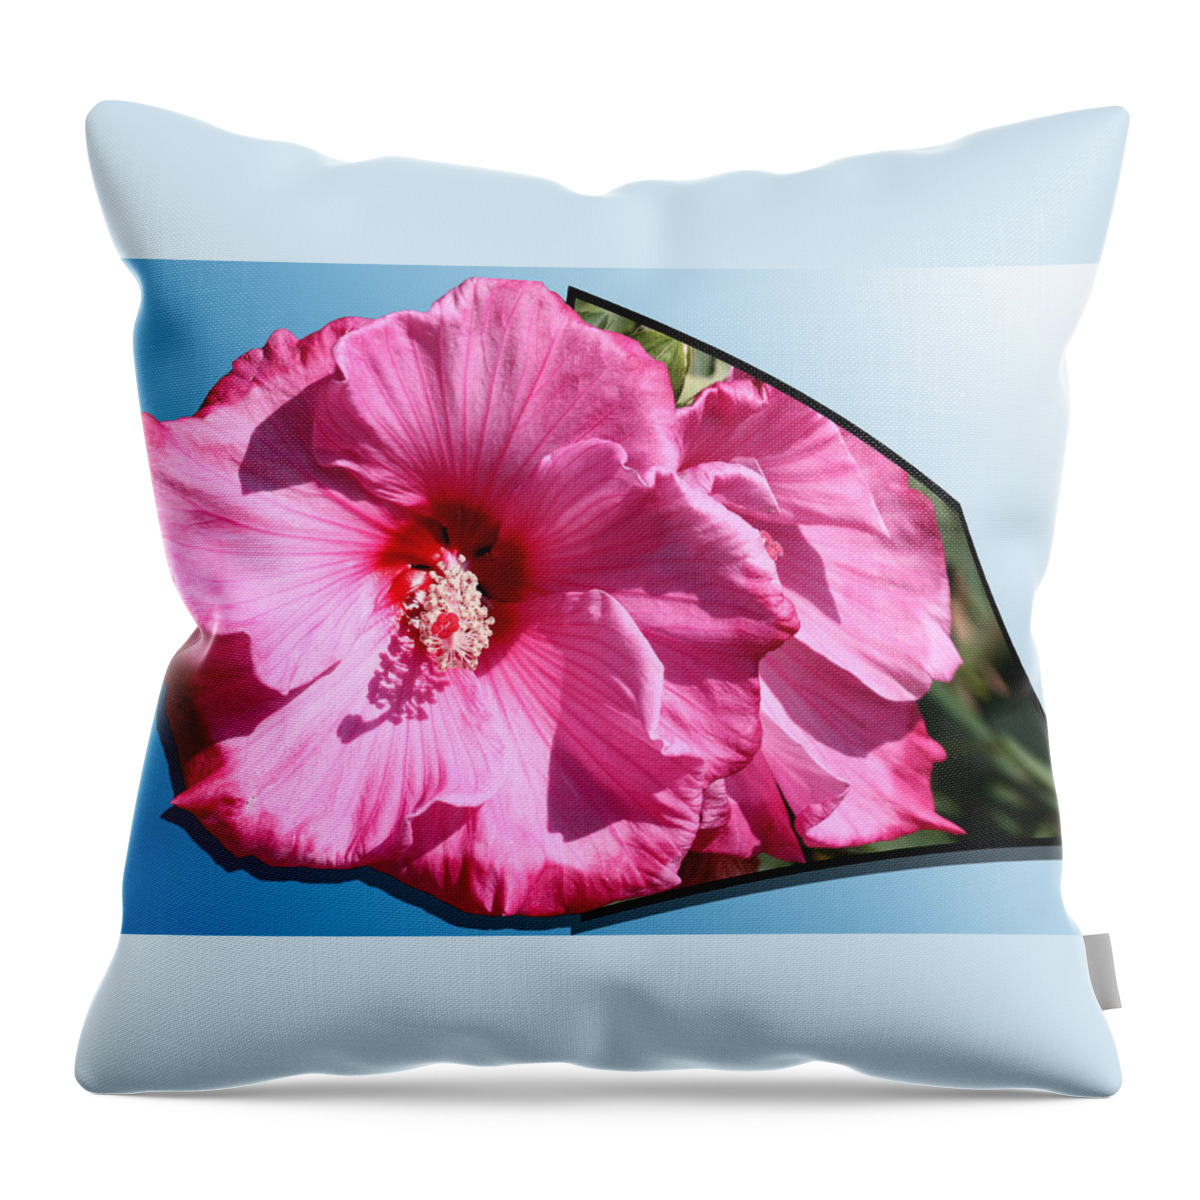 Hibiscus Throw Pillow featuring the photograph Hibiscus by Shane Bechler